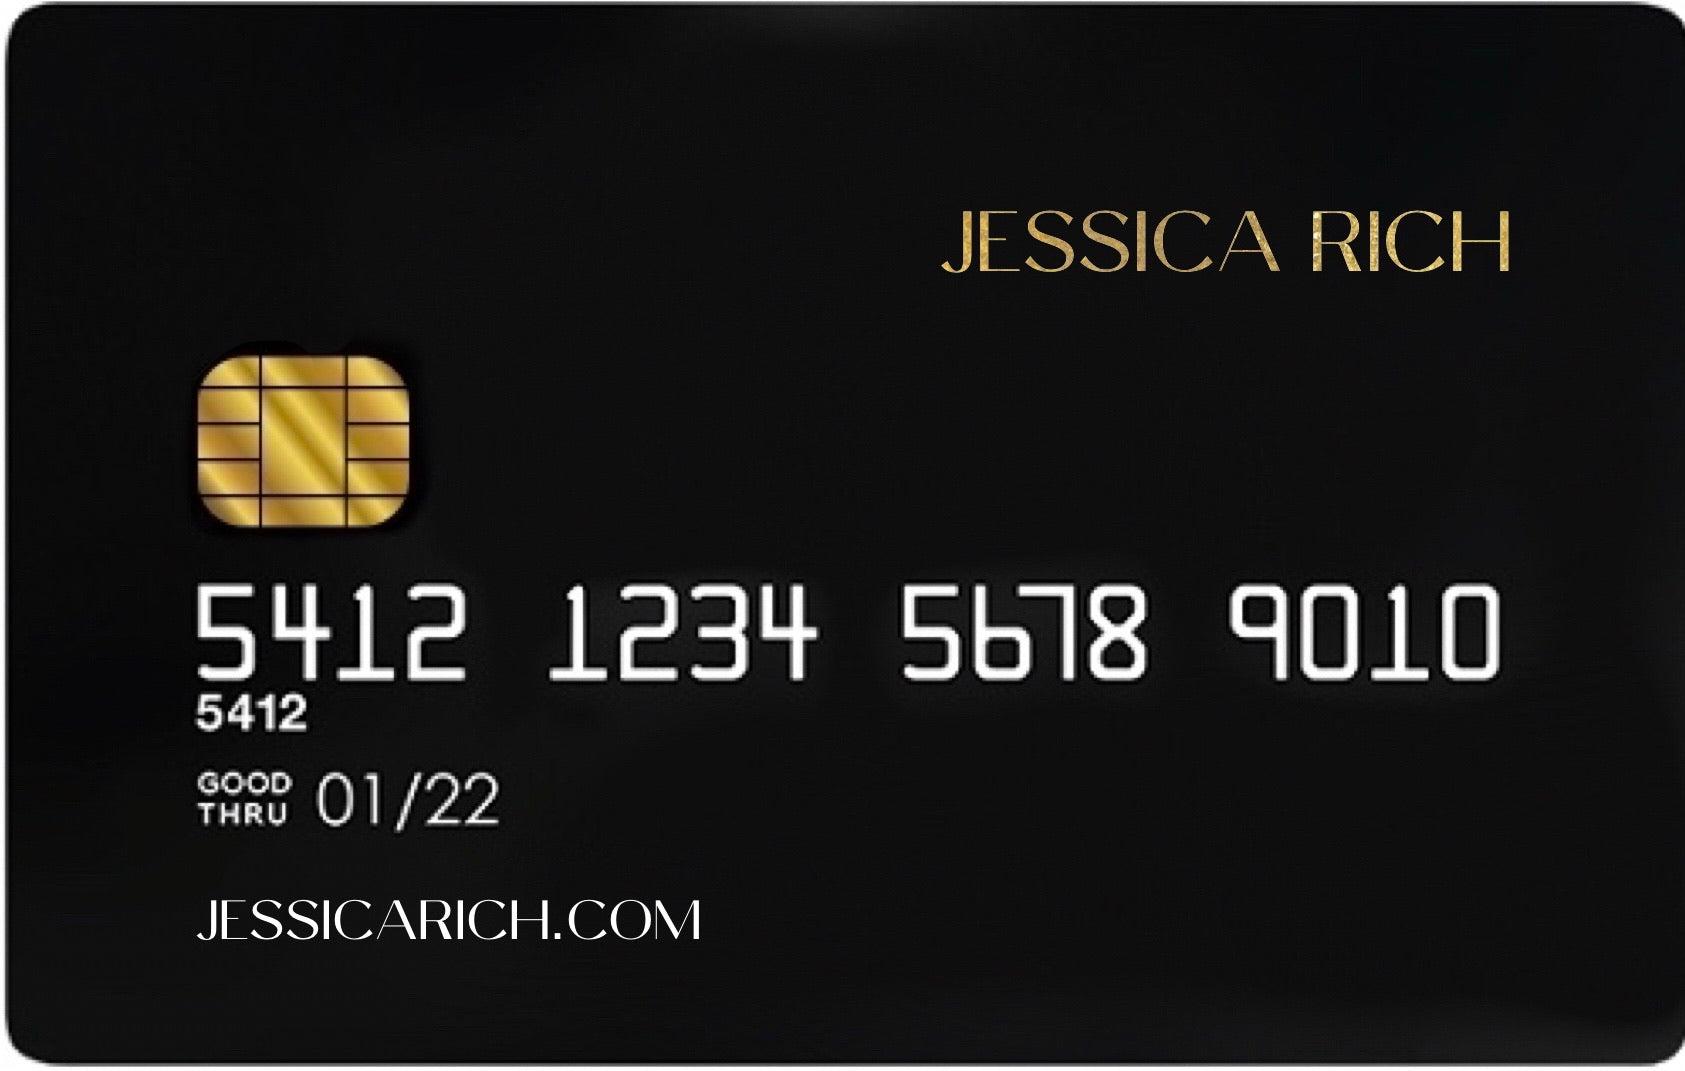 GIFT CARDS - JESSICA RICH